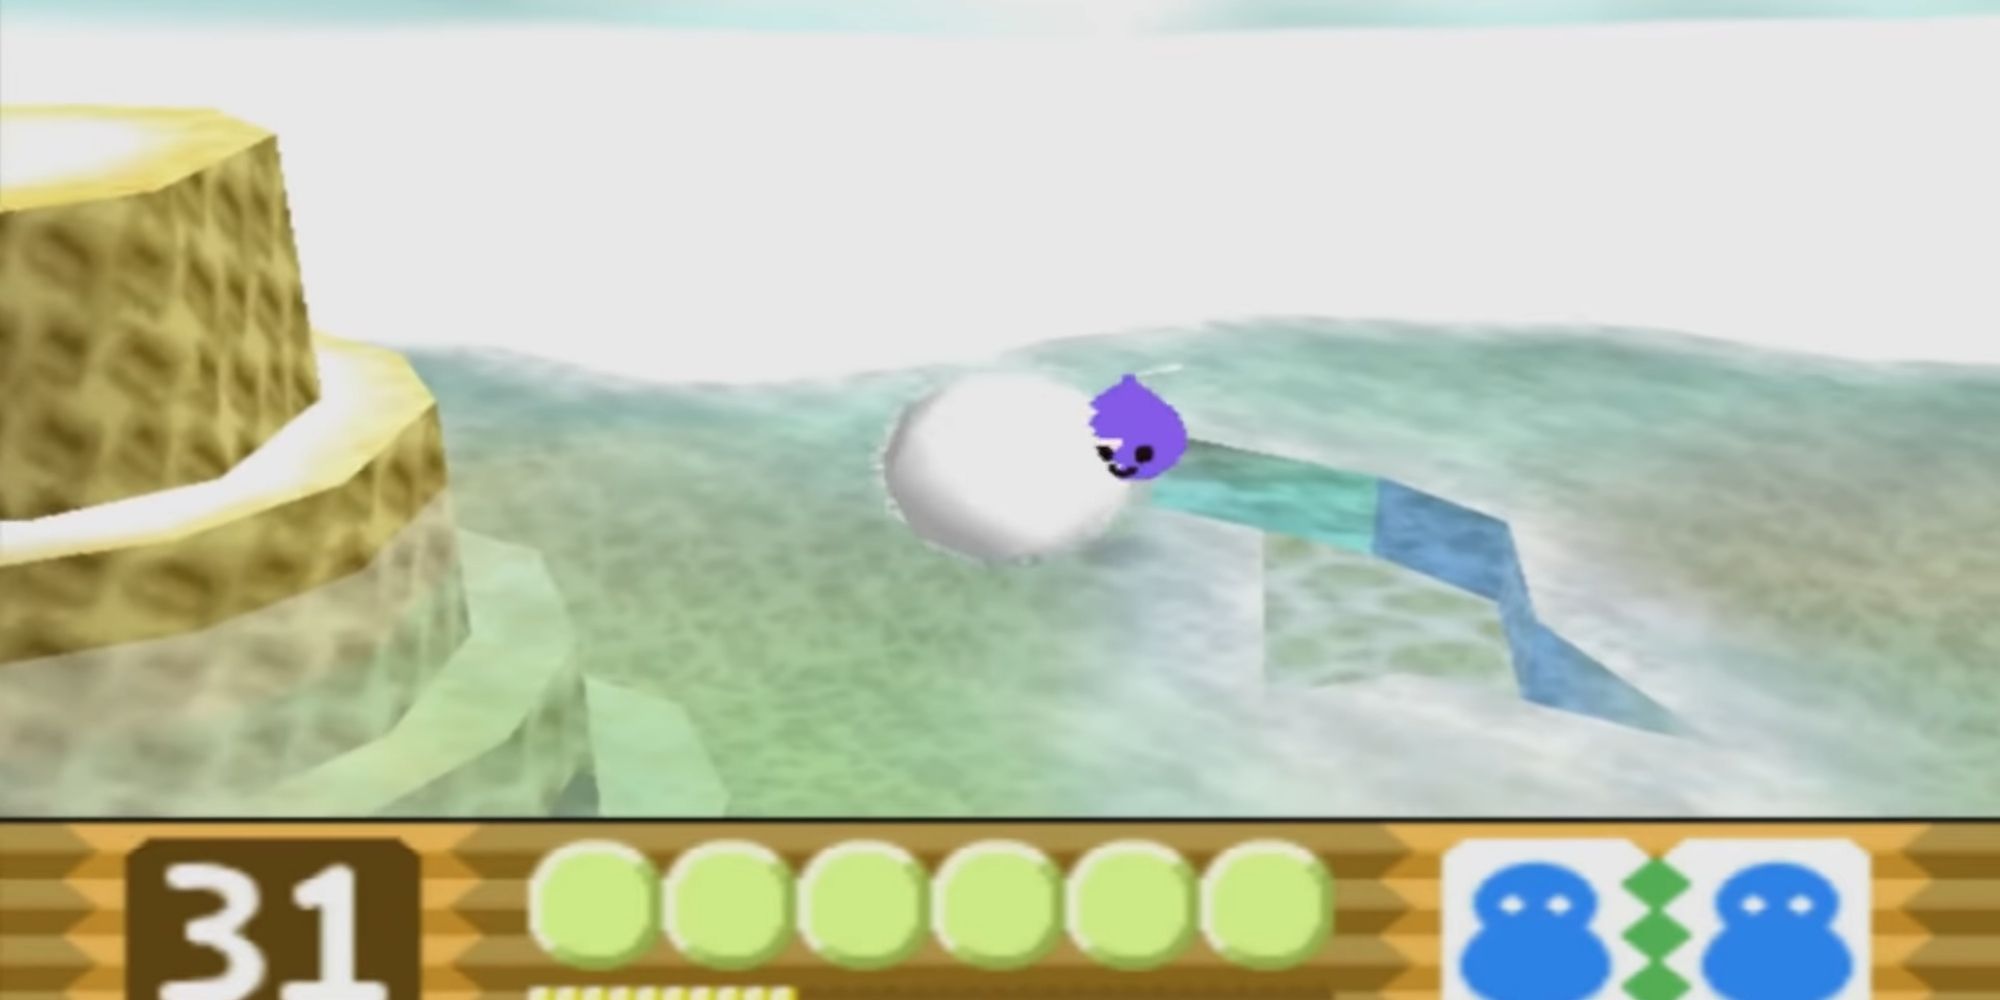 Kirby as a Snowball absorbs enemies while rolling across the ice